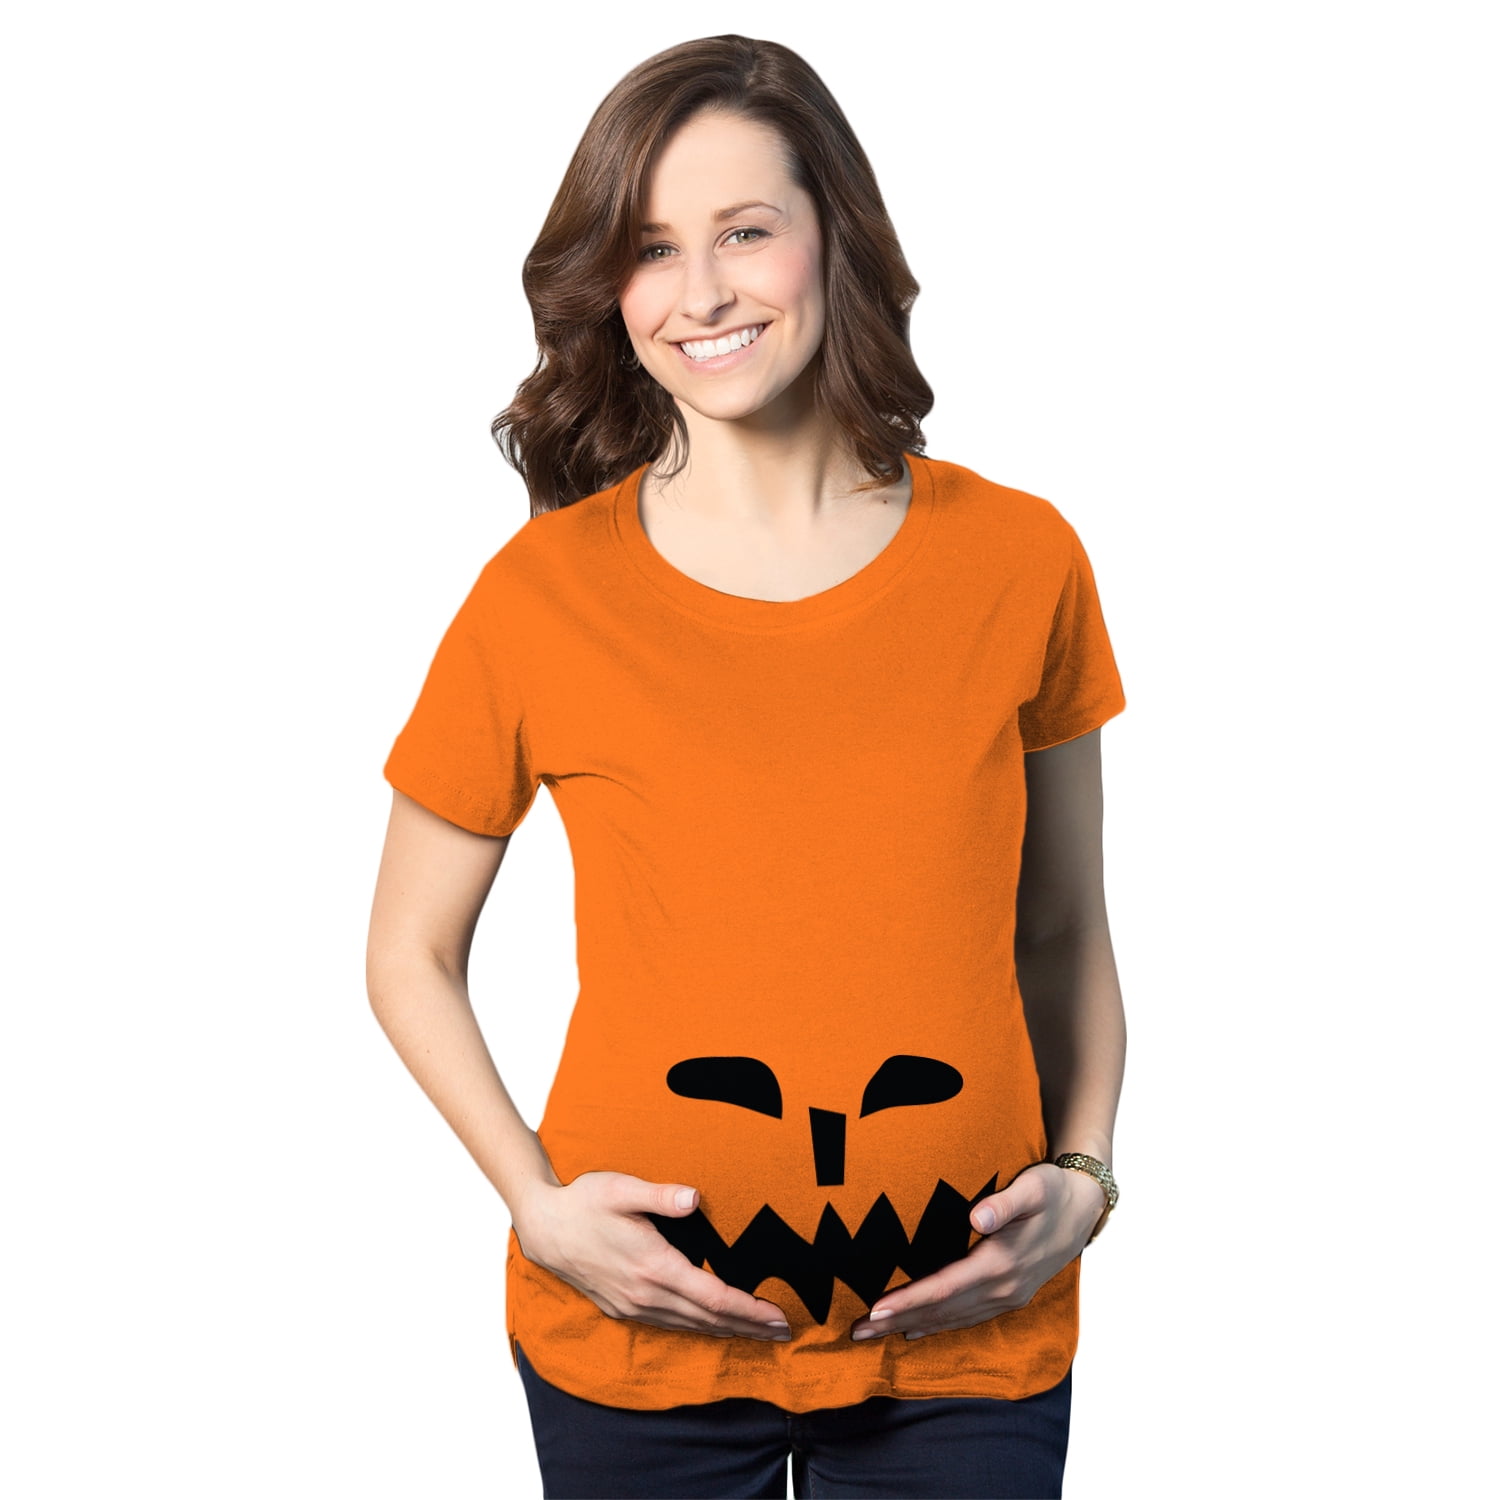 Dont Eat Pumpkin Seeds Letter Printed T-Shirt Women Short Sleeve Funny Halloween Maternity Pregnancy Casual Tee Tops